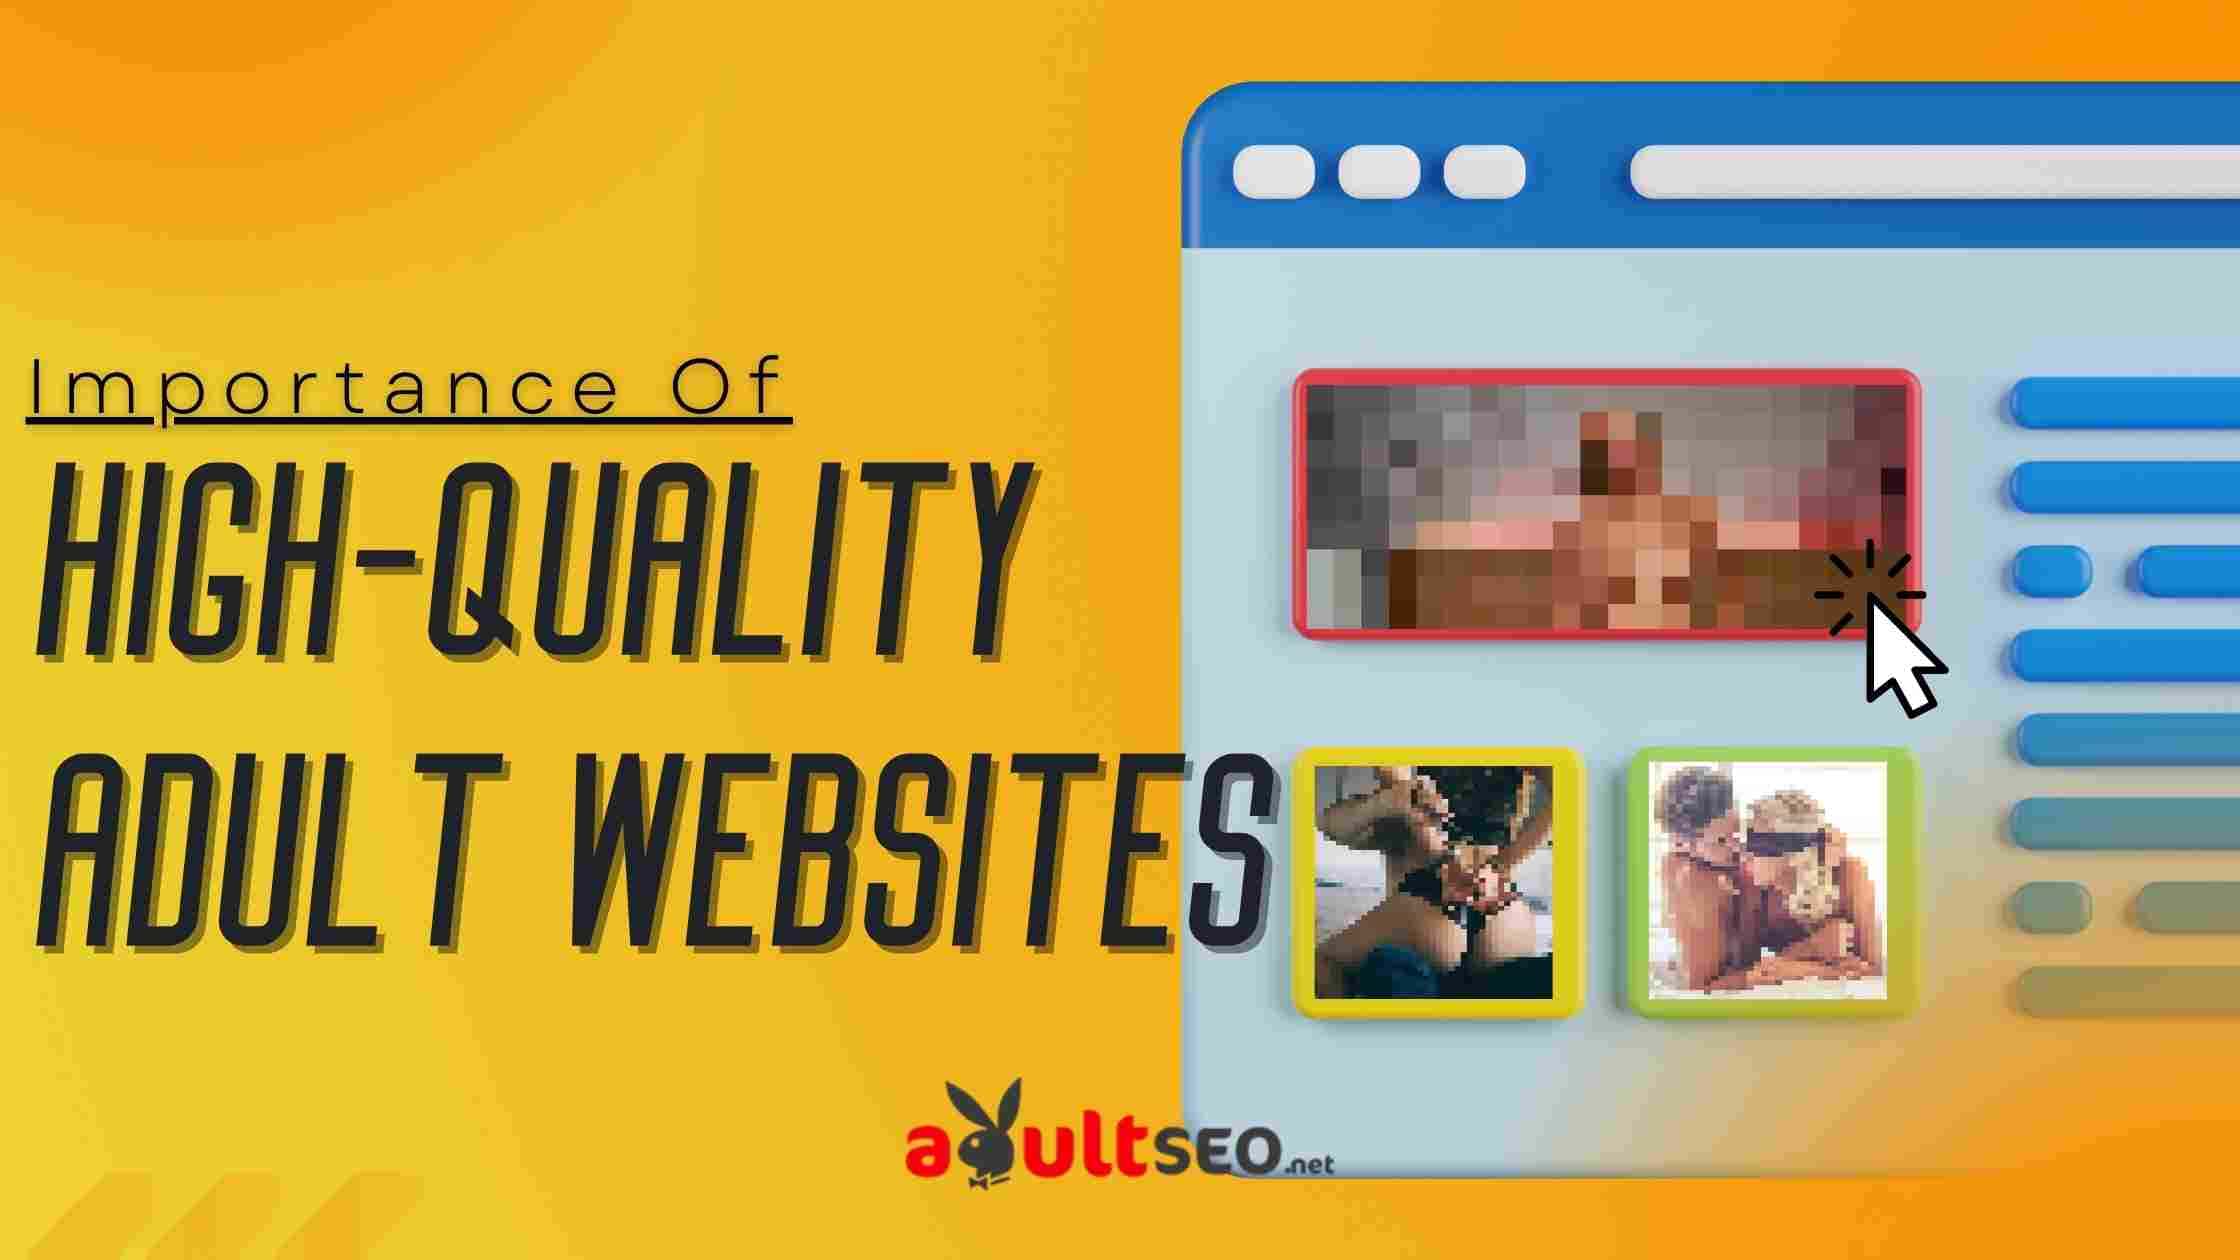 Importance of High-Quality Adult Websites